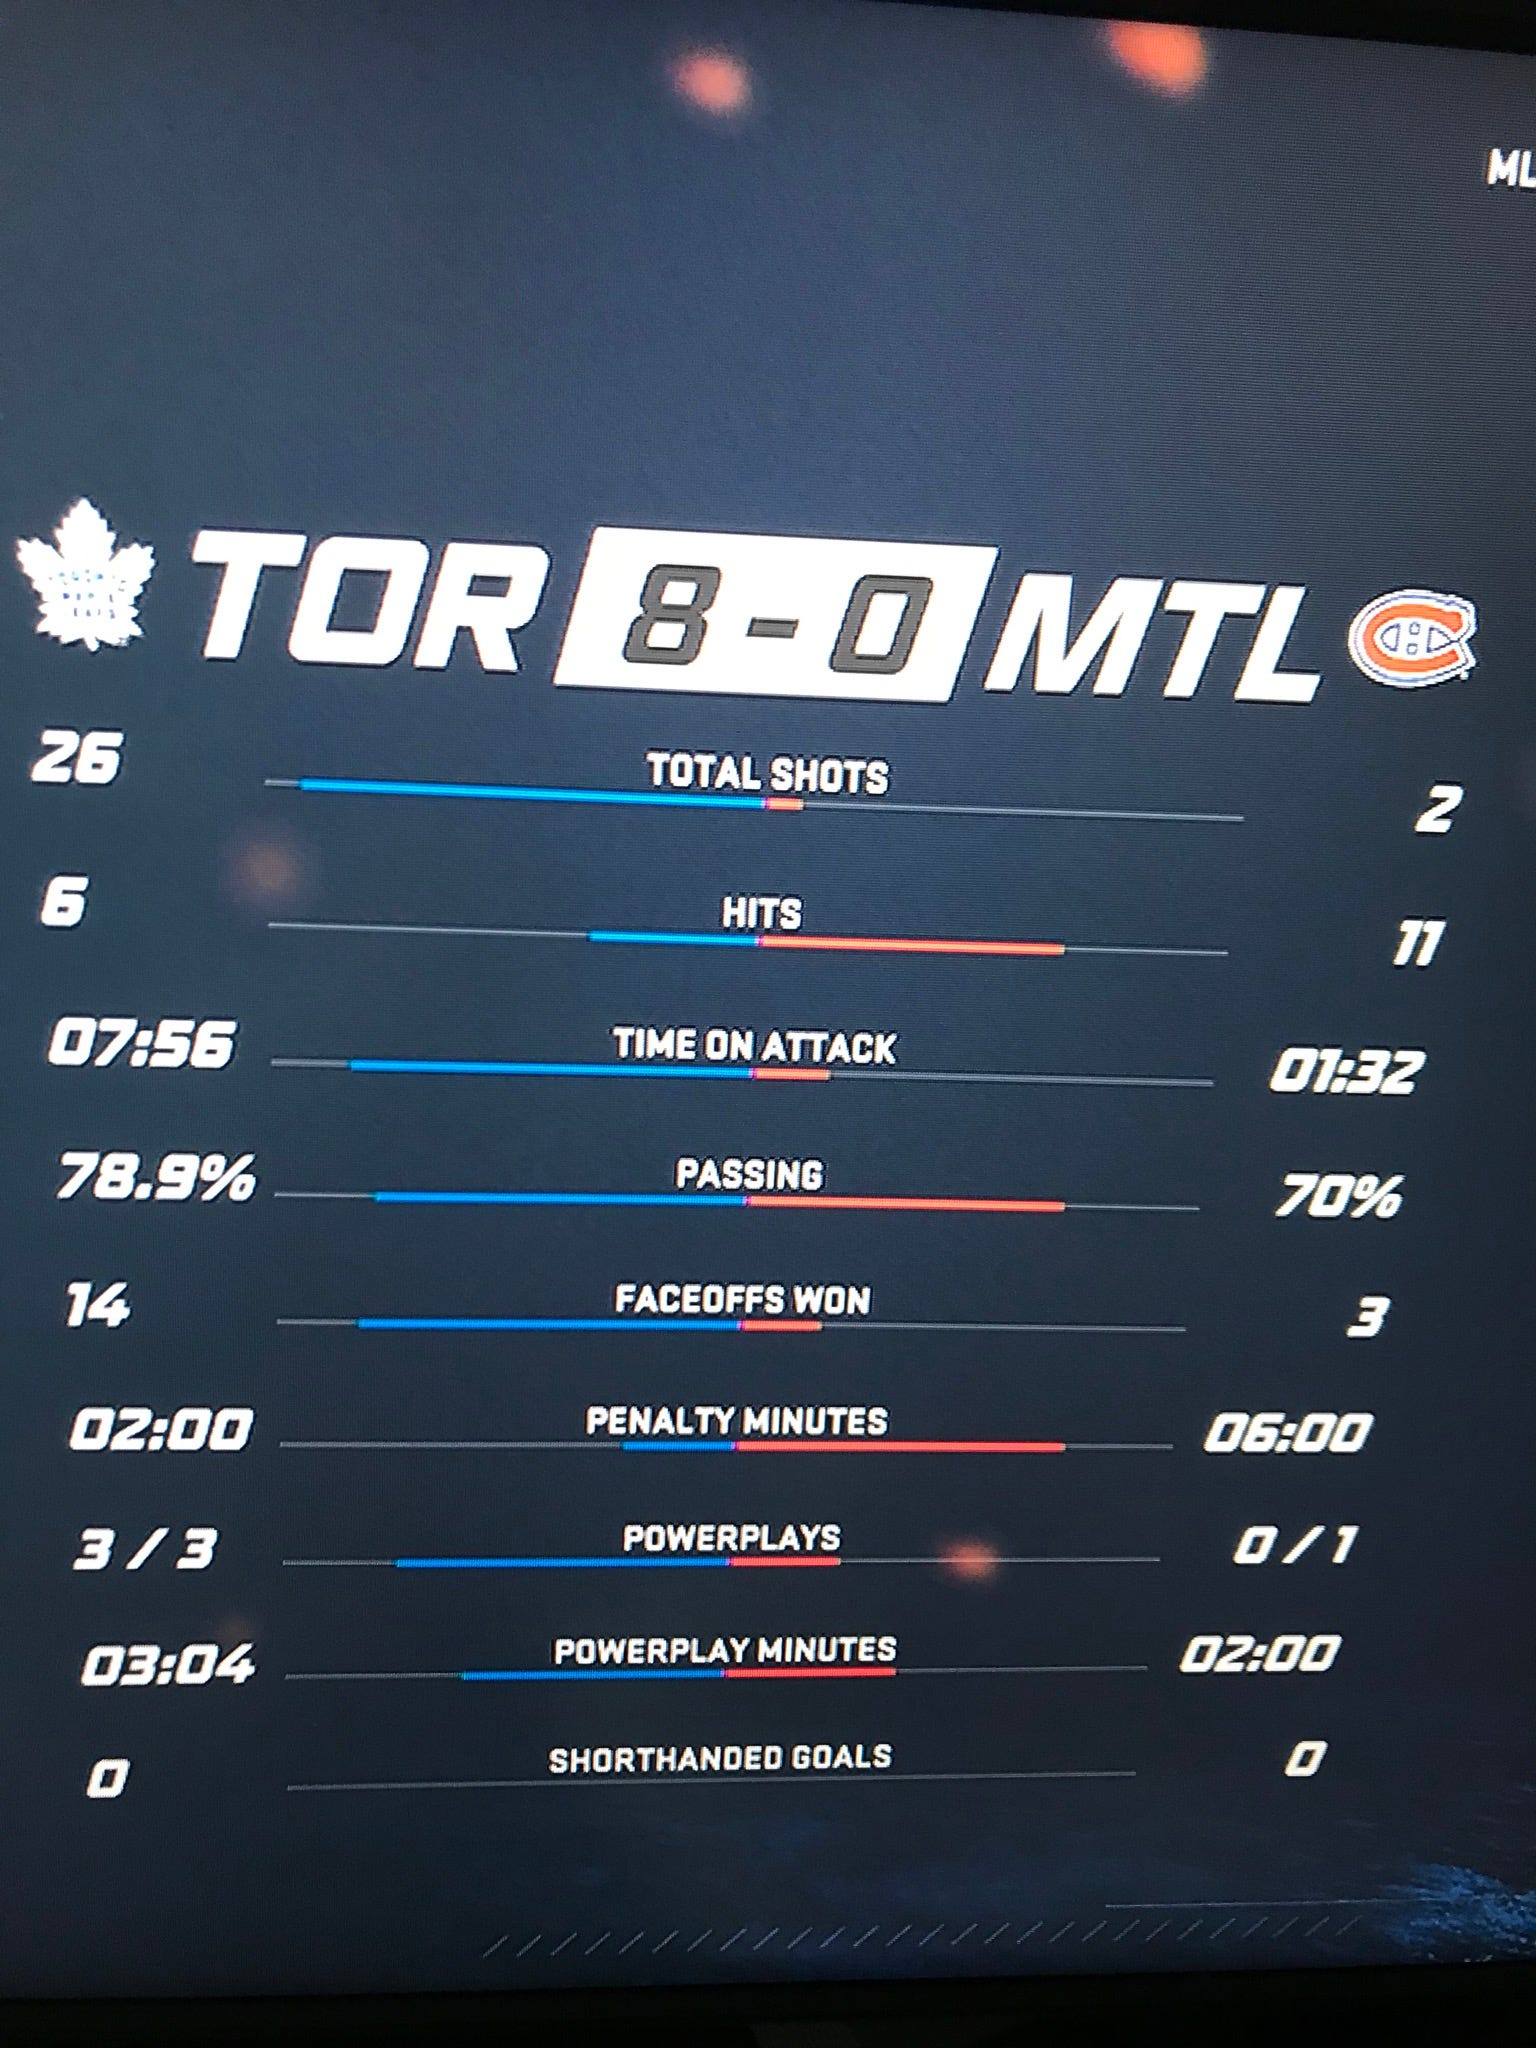 Making Tactical Adjustments in NHL20 and Beyond (Updated 28/6/20)